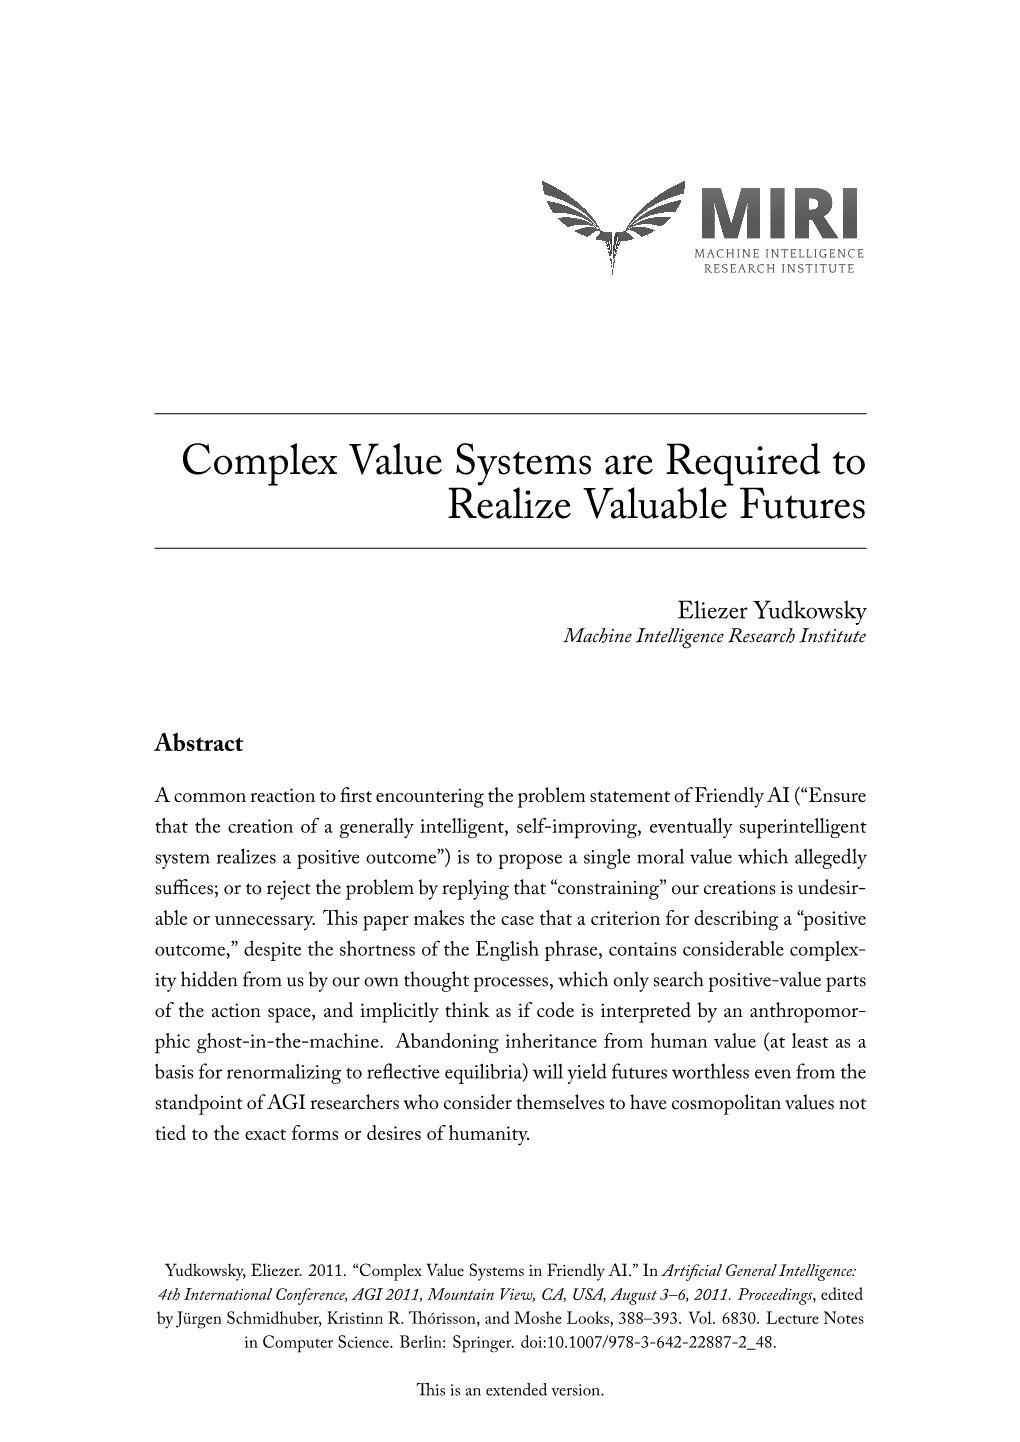 Complex Value Systems Are Required to Realize Valuable Futures